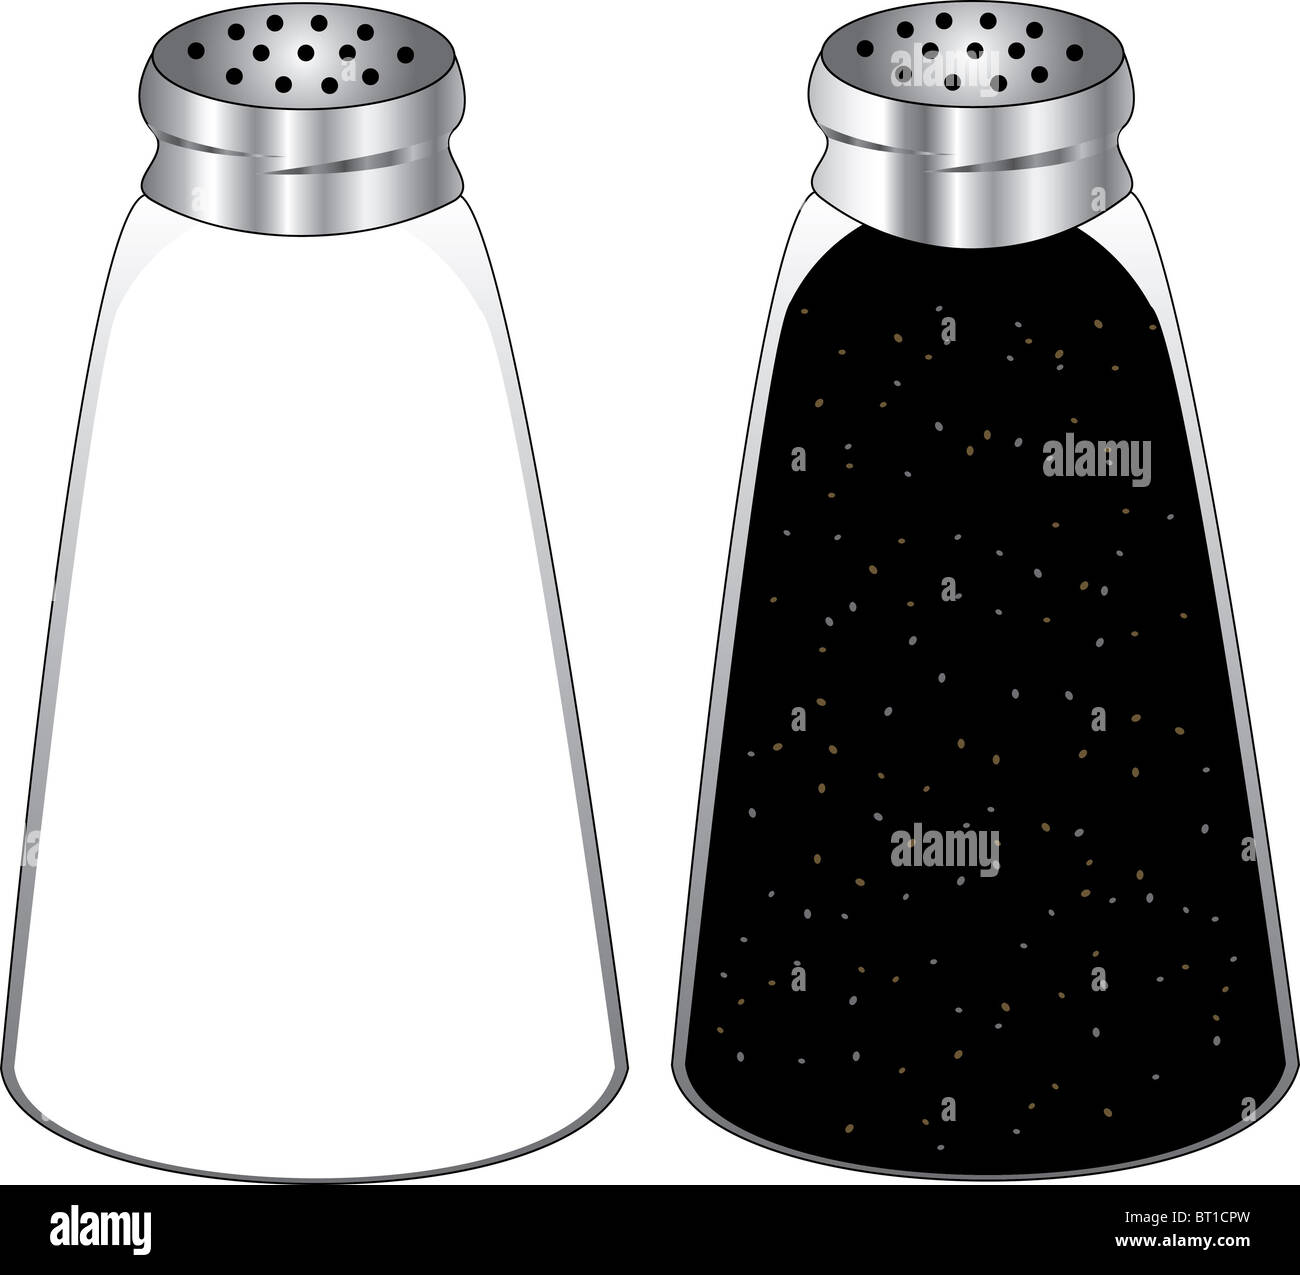 Illustration of pepper and salt shakers isolated. Stock Photo